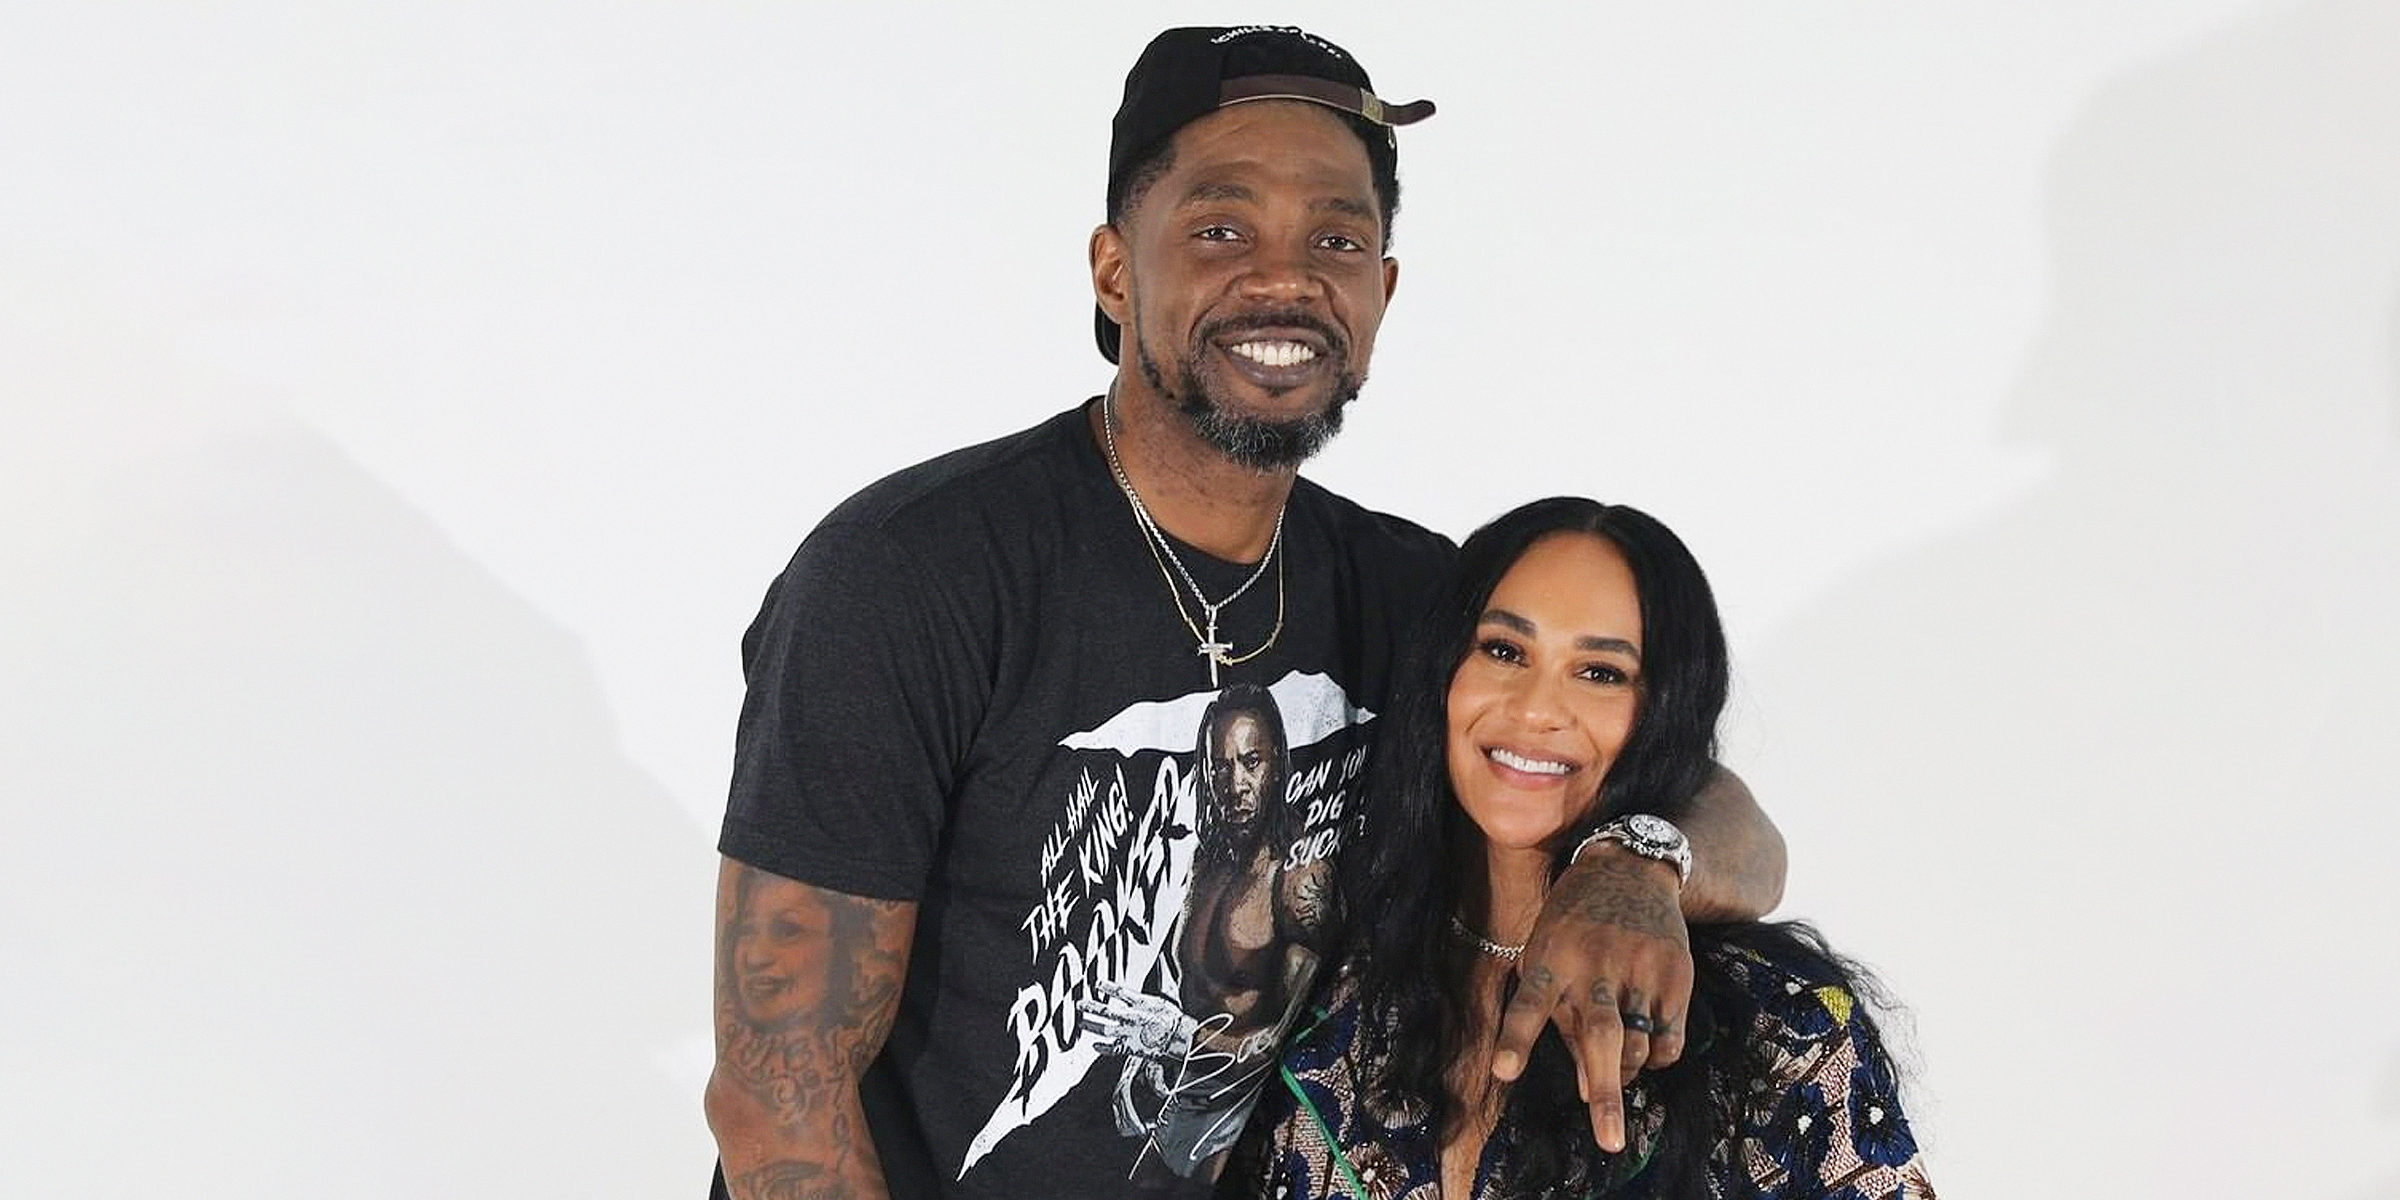 Udonis and Faith Haslem | Source: instagram.com/ud40